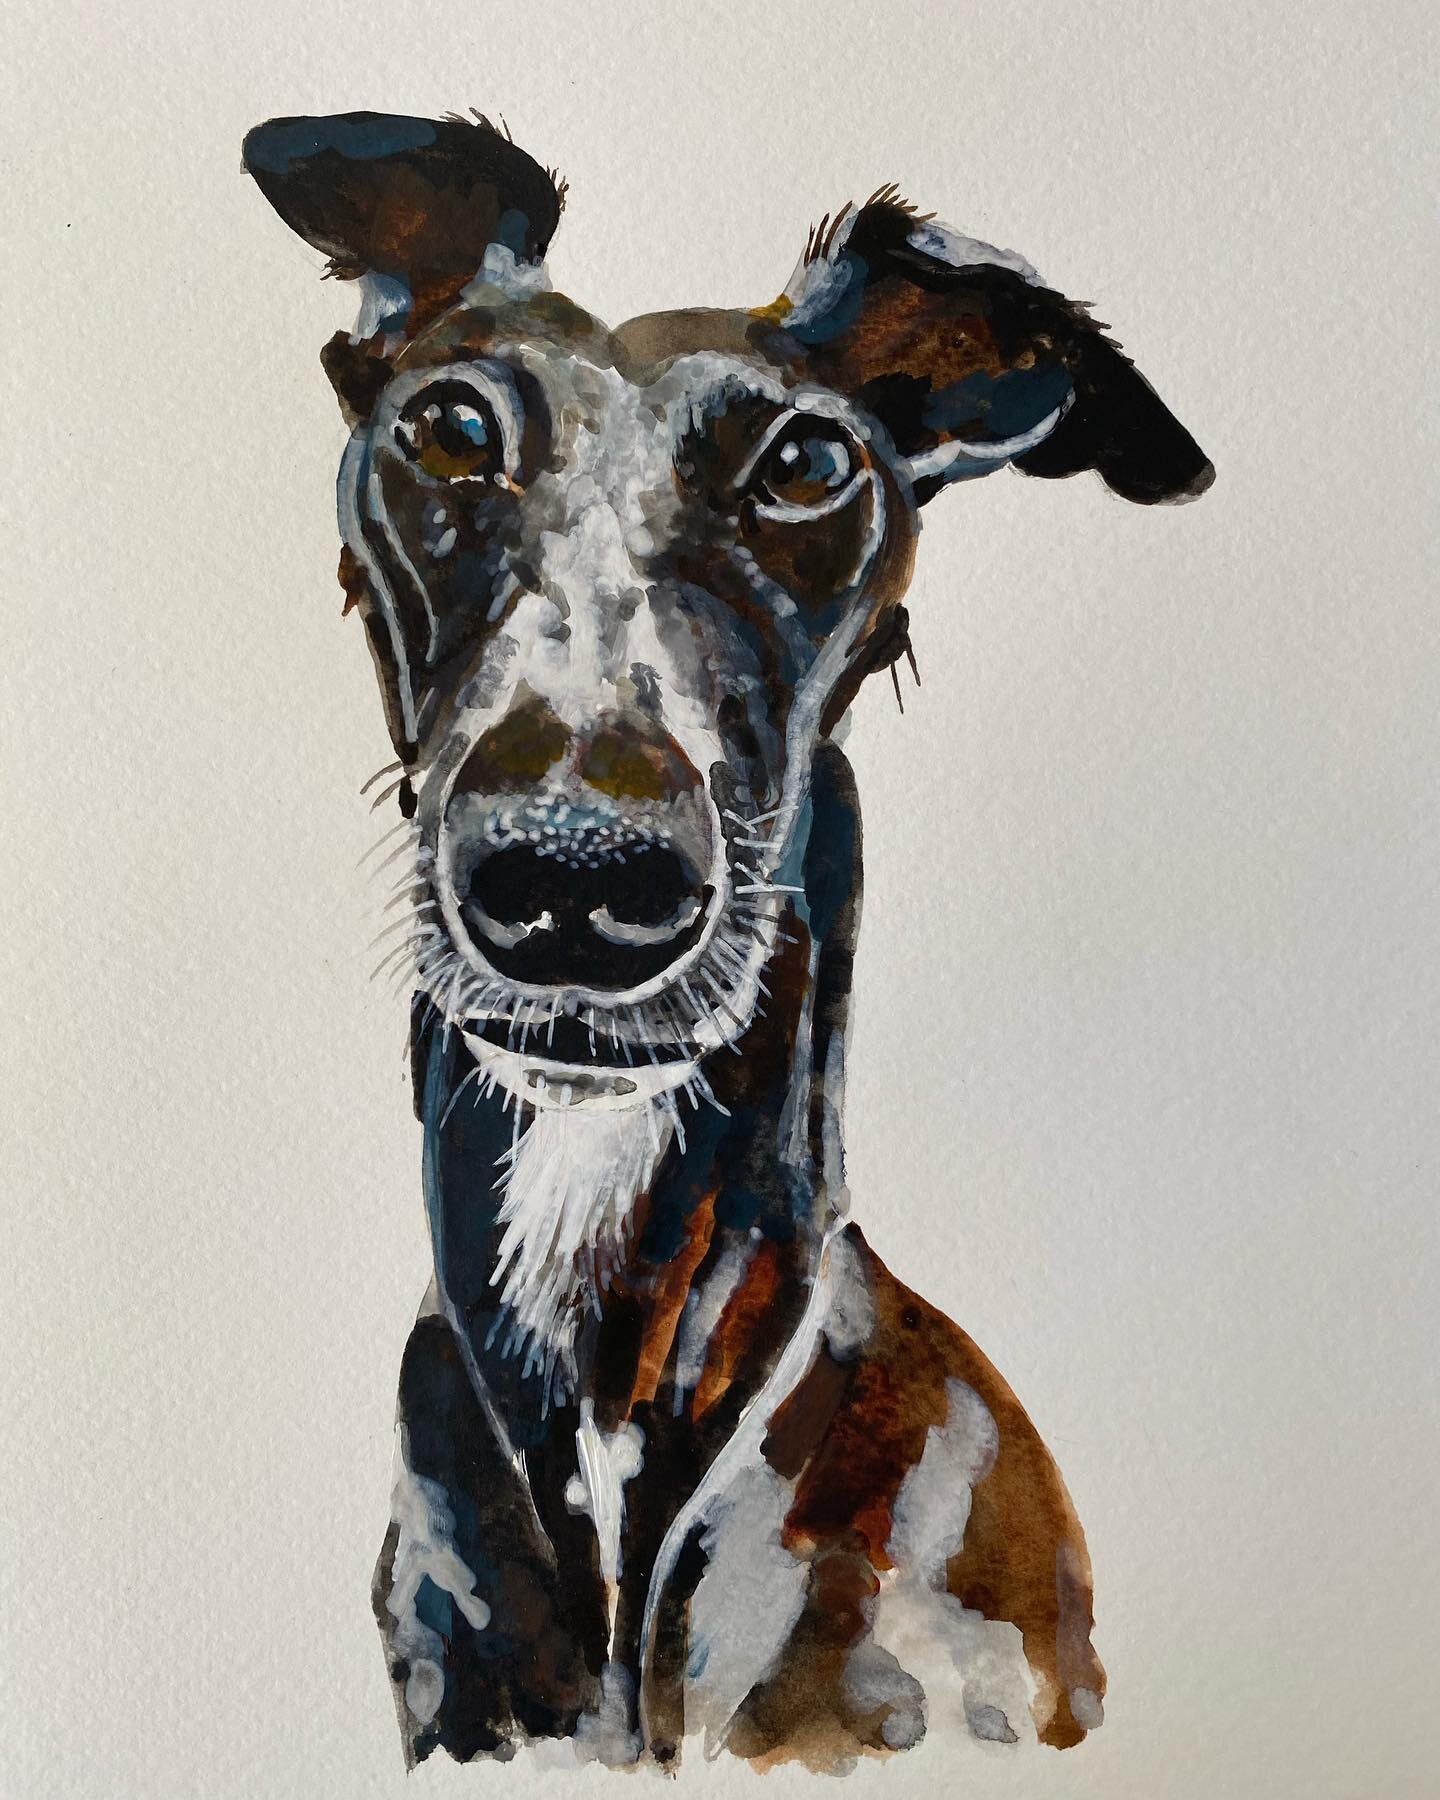 Whippet 
Watercolor 
Passers By Gallery 
$60 to commission a small watercolor like this one - valentines gift anyone??